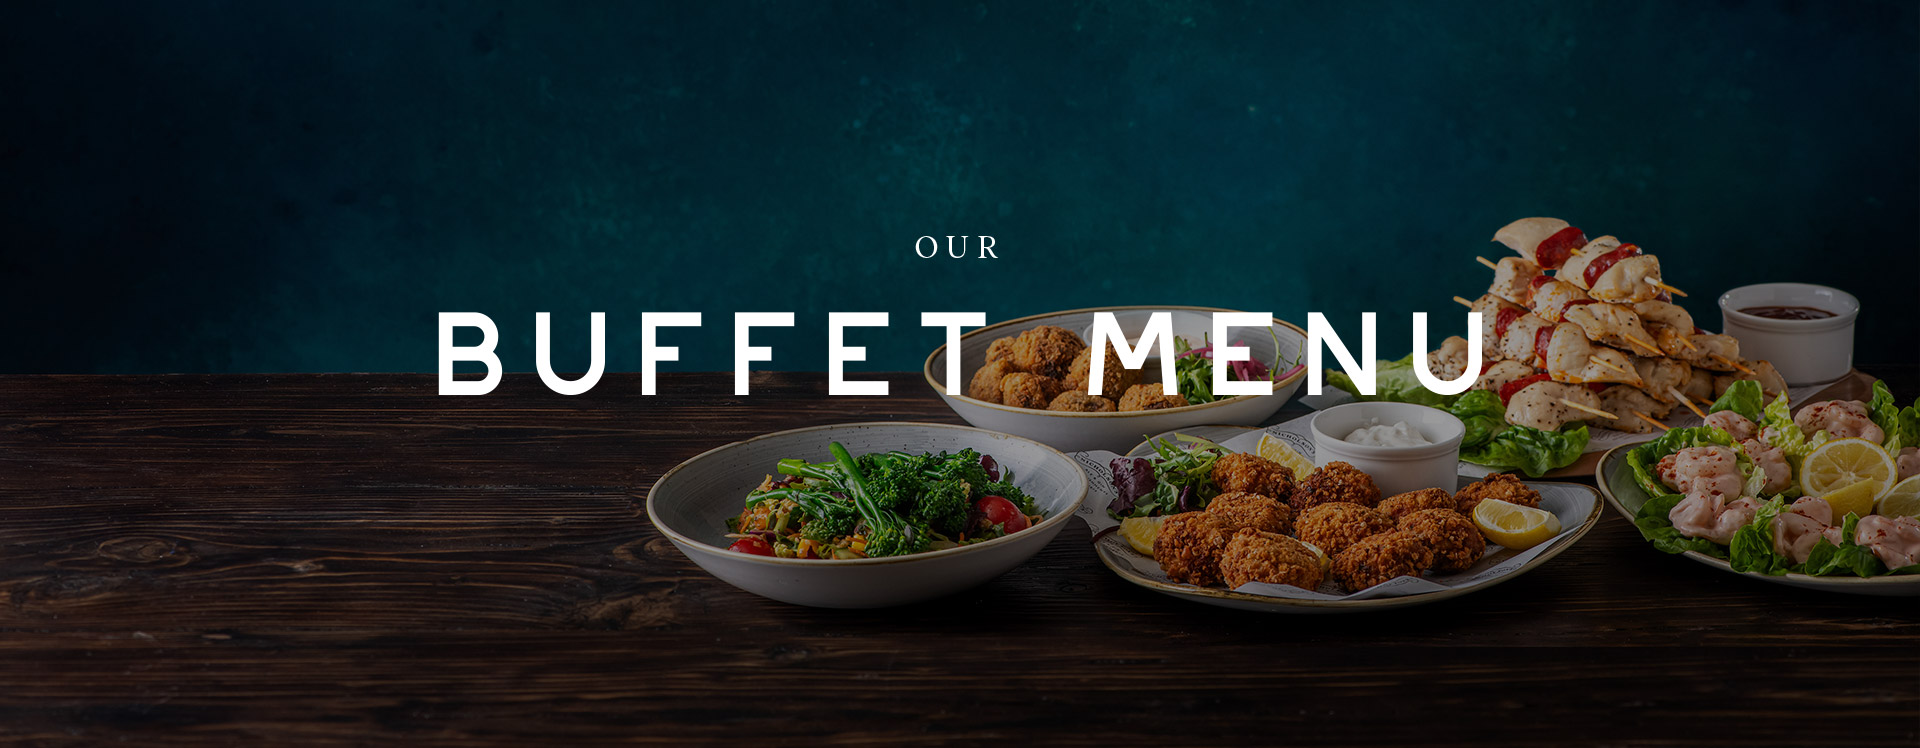 Buffet menu at The Old Buttermarket - Book a table